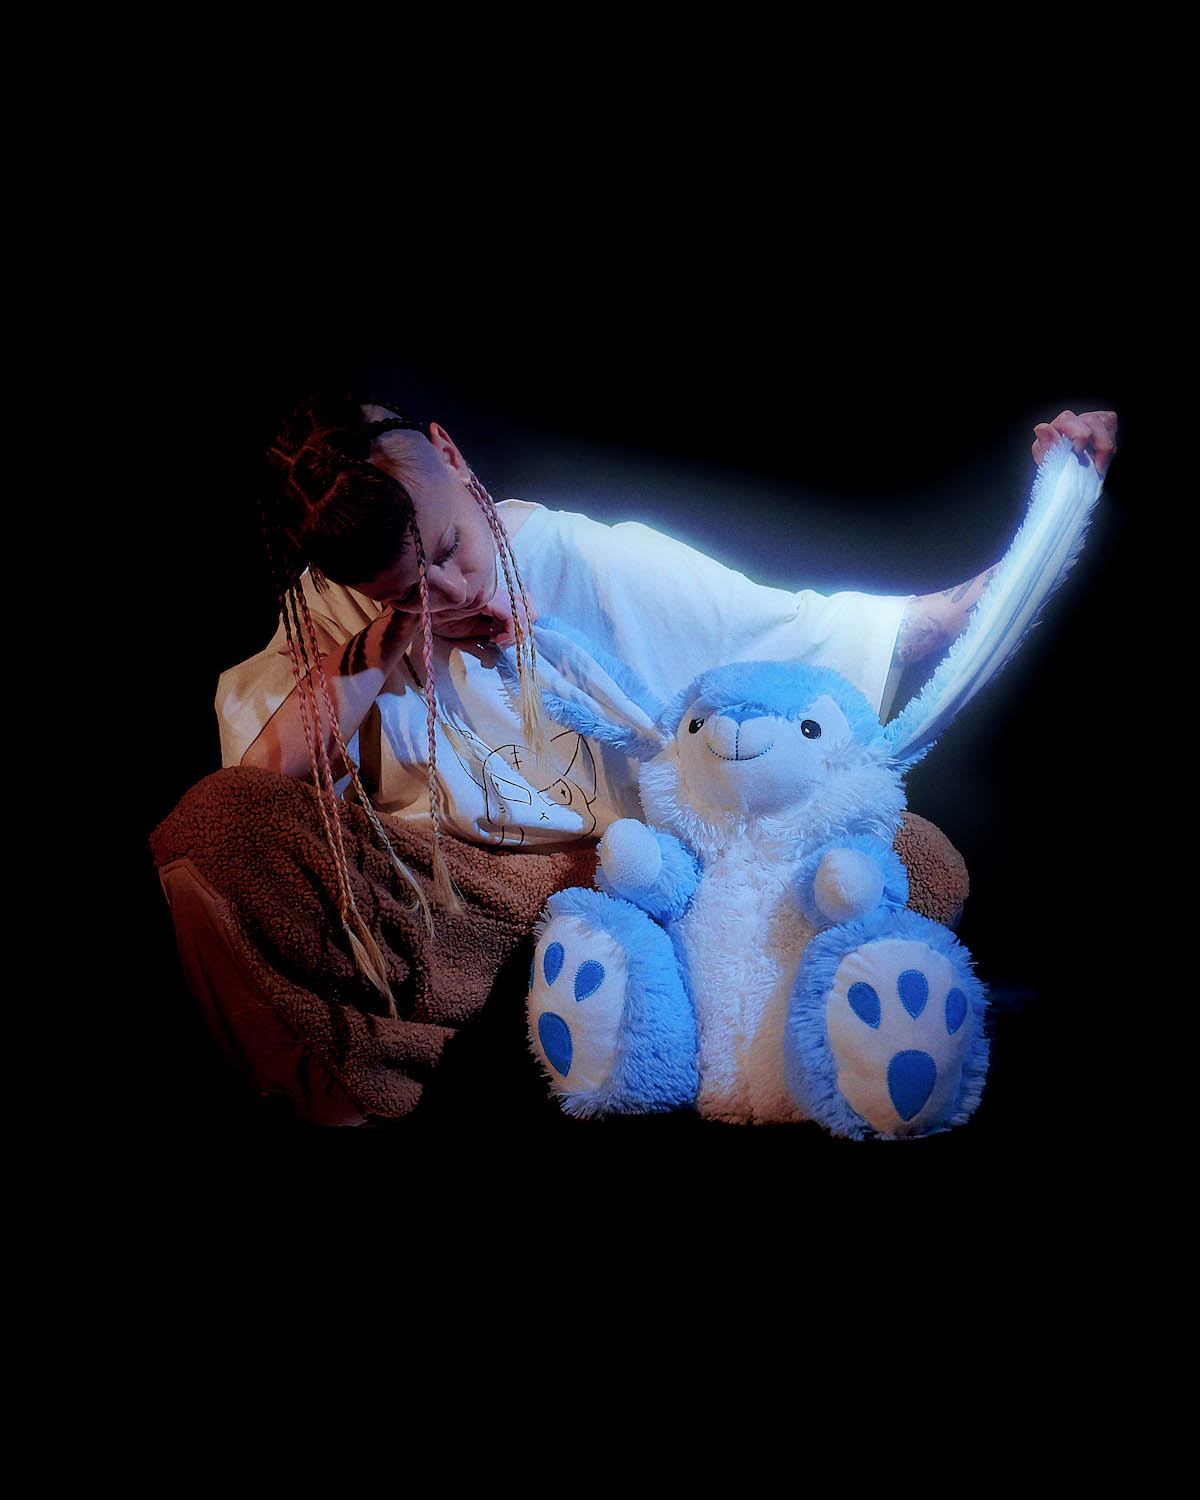 White female person sits on the floor in front of black background. She wears a white oversized shirt and brown plush pants. Her long hair is tied into several thin braids and shaved off at the sides. She is looking at a white and blue plush bunny sitting in front of her and lifting up its ears.